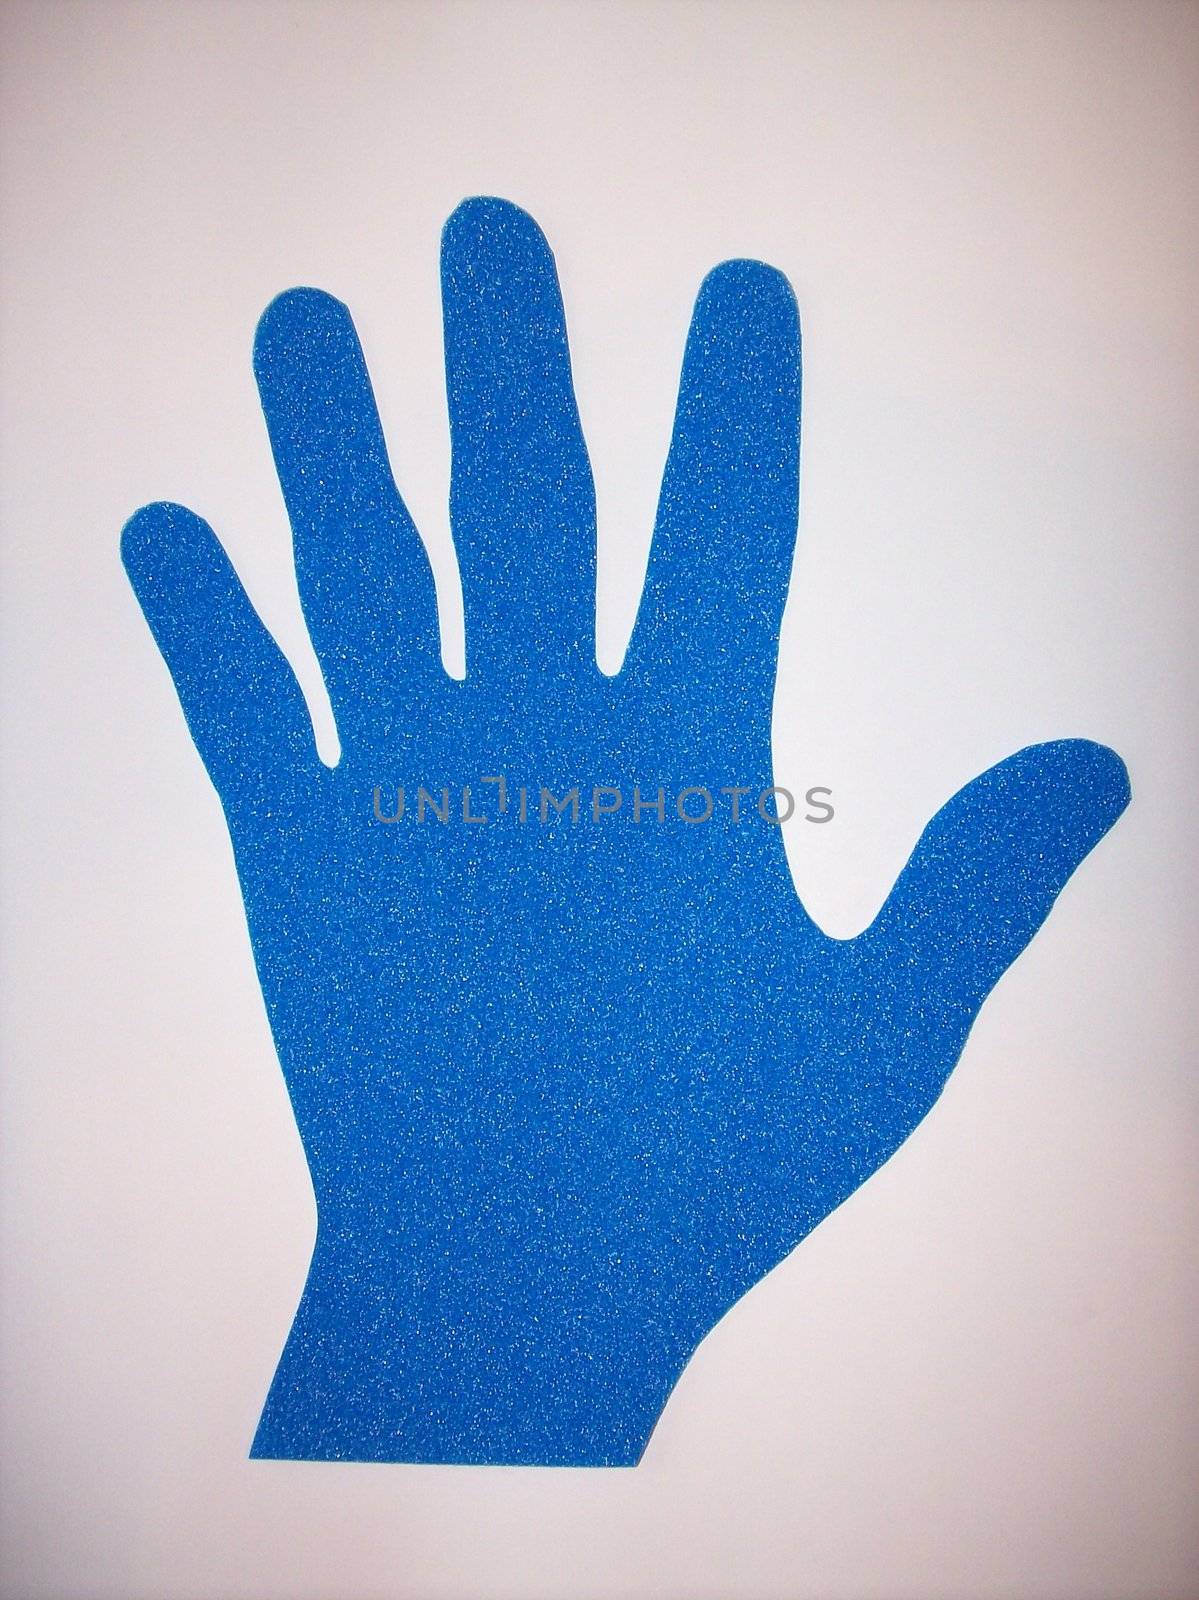 Illustration of a blue hand made of foam